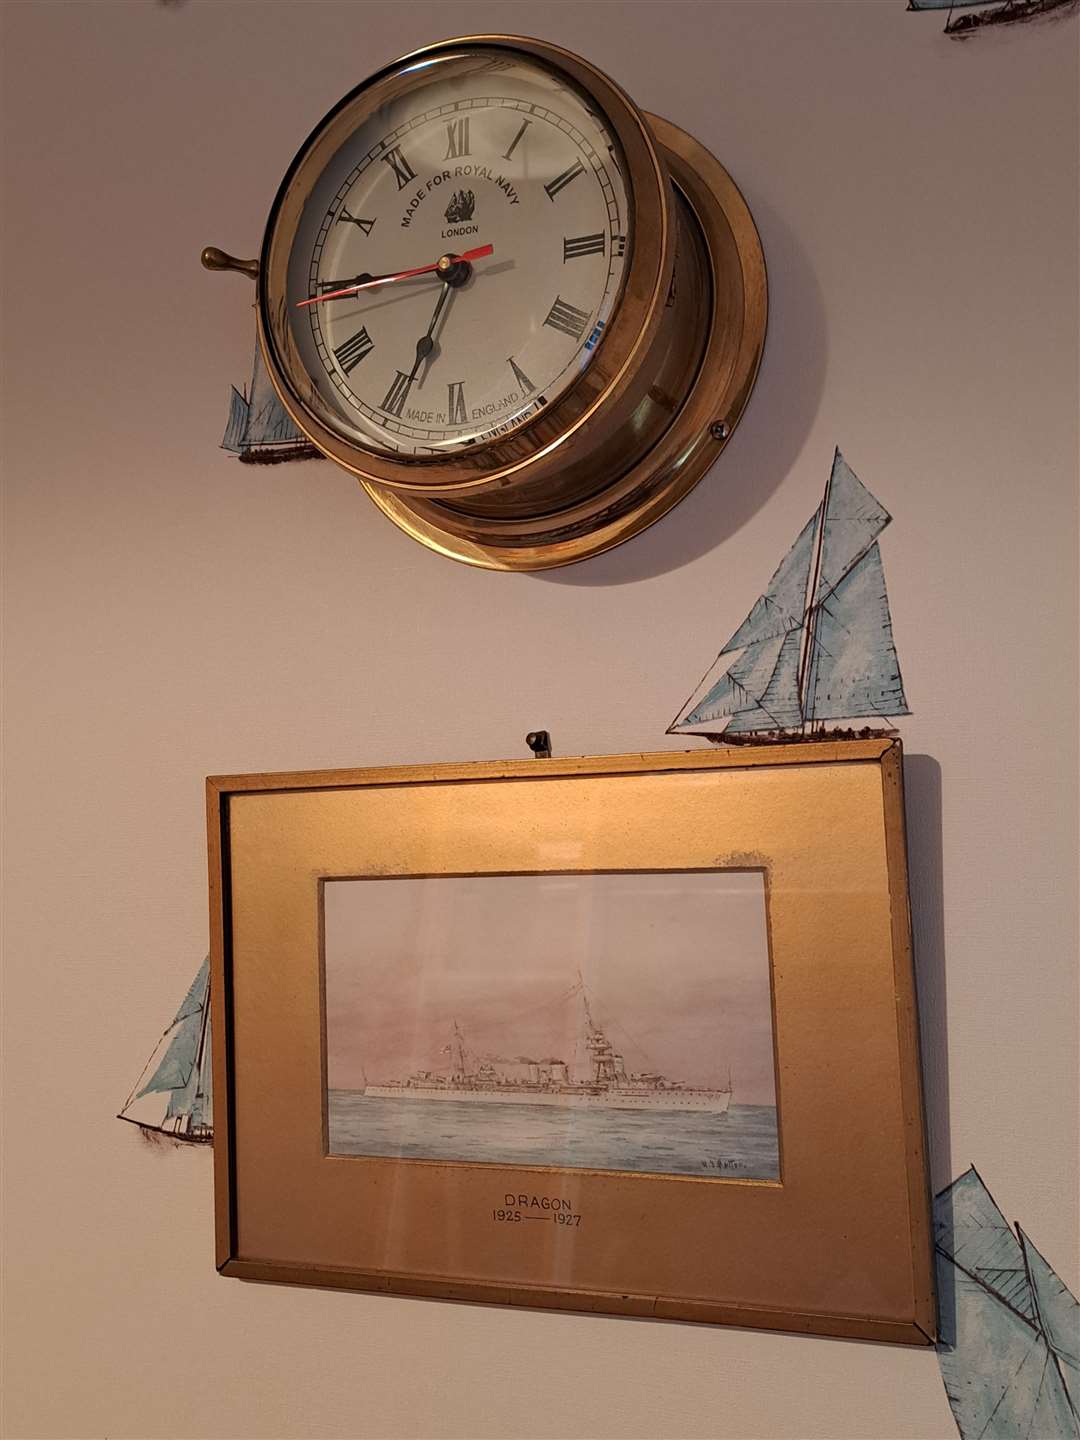 The non-functioning porthole clock above a painting of HMS Dragon in my son's nautical themed bedroom